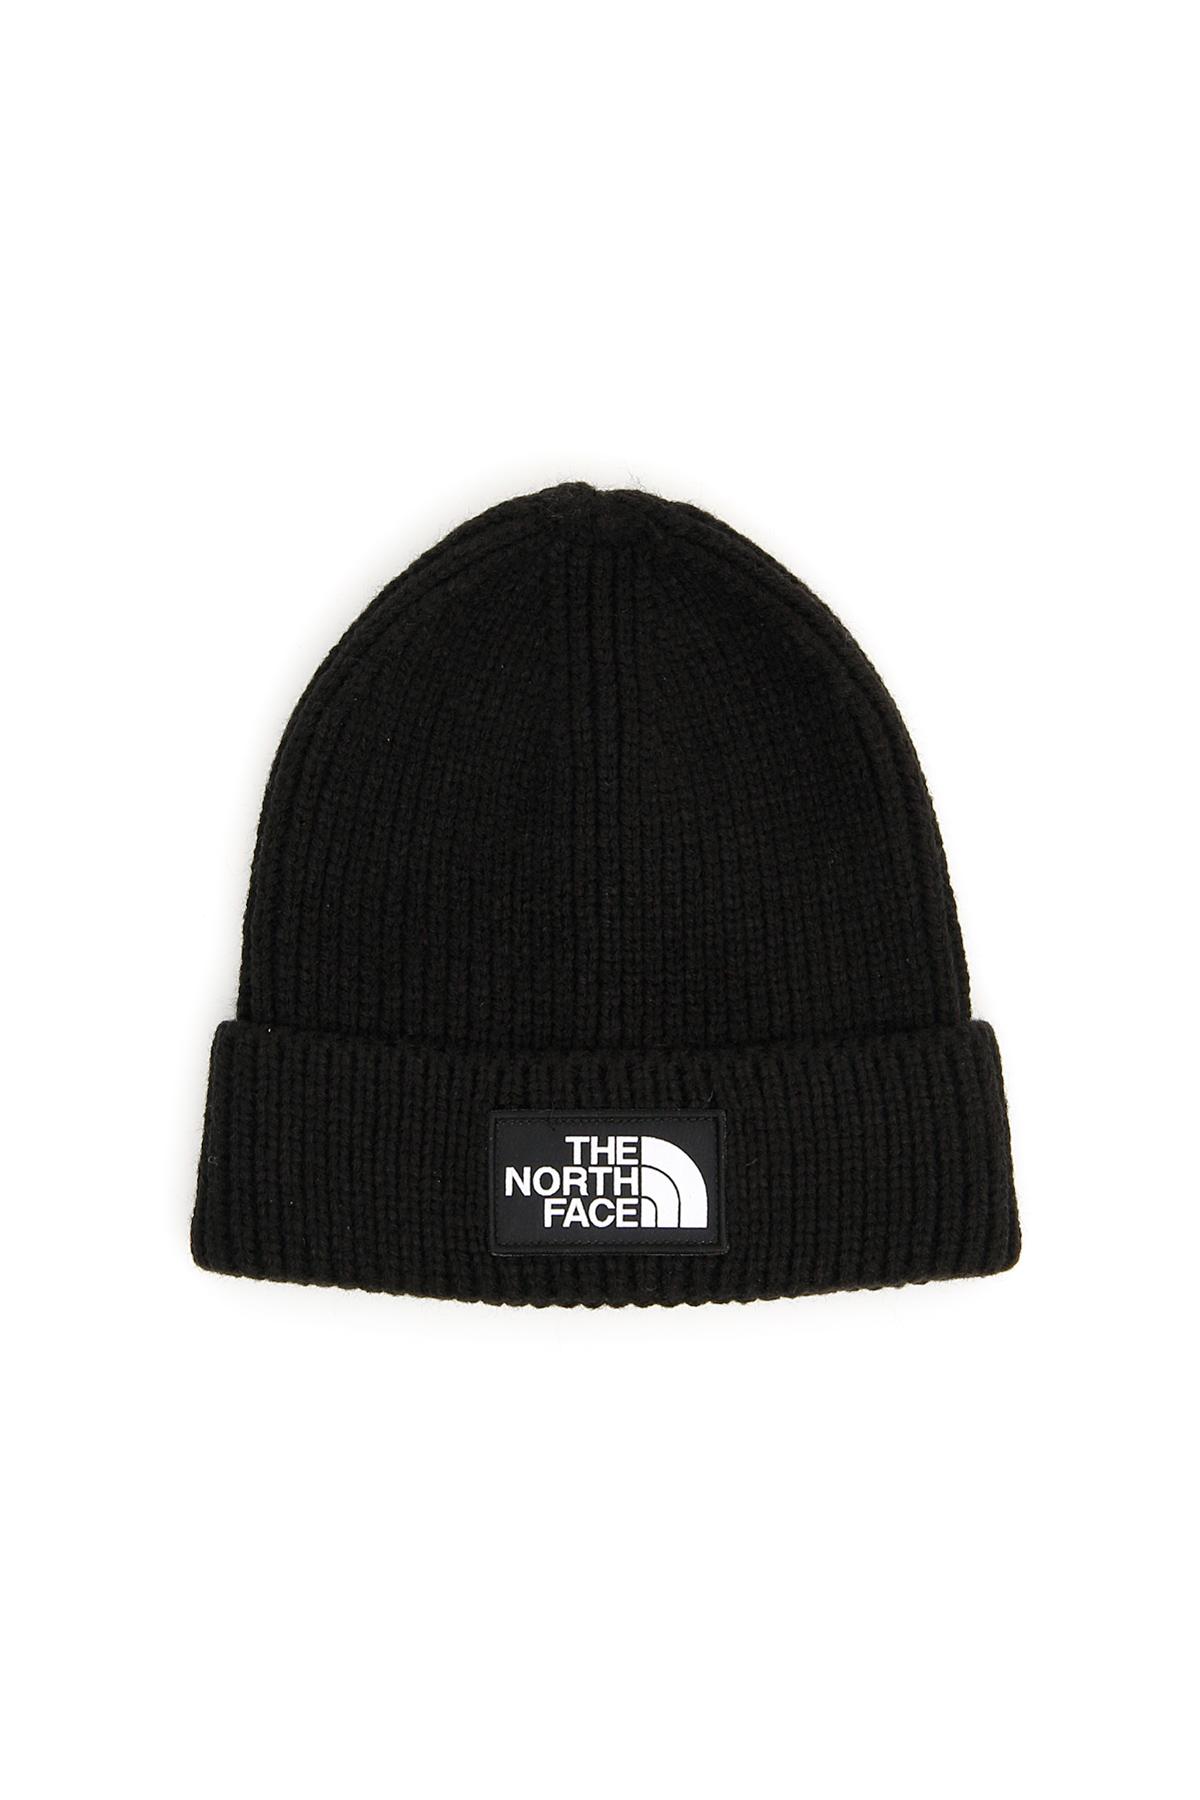 The North Face Beanie With Logo Patch in Black for Men - Lyst